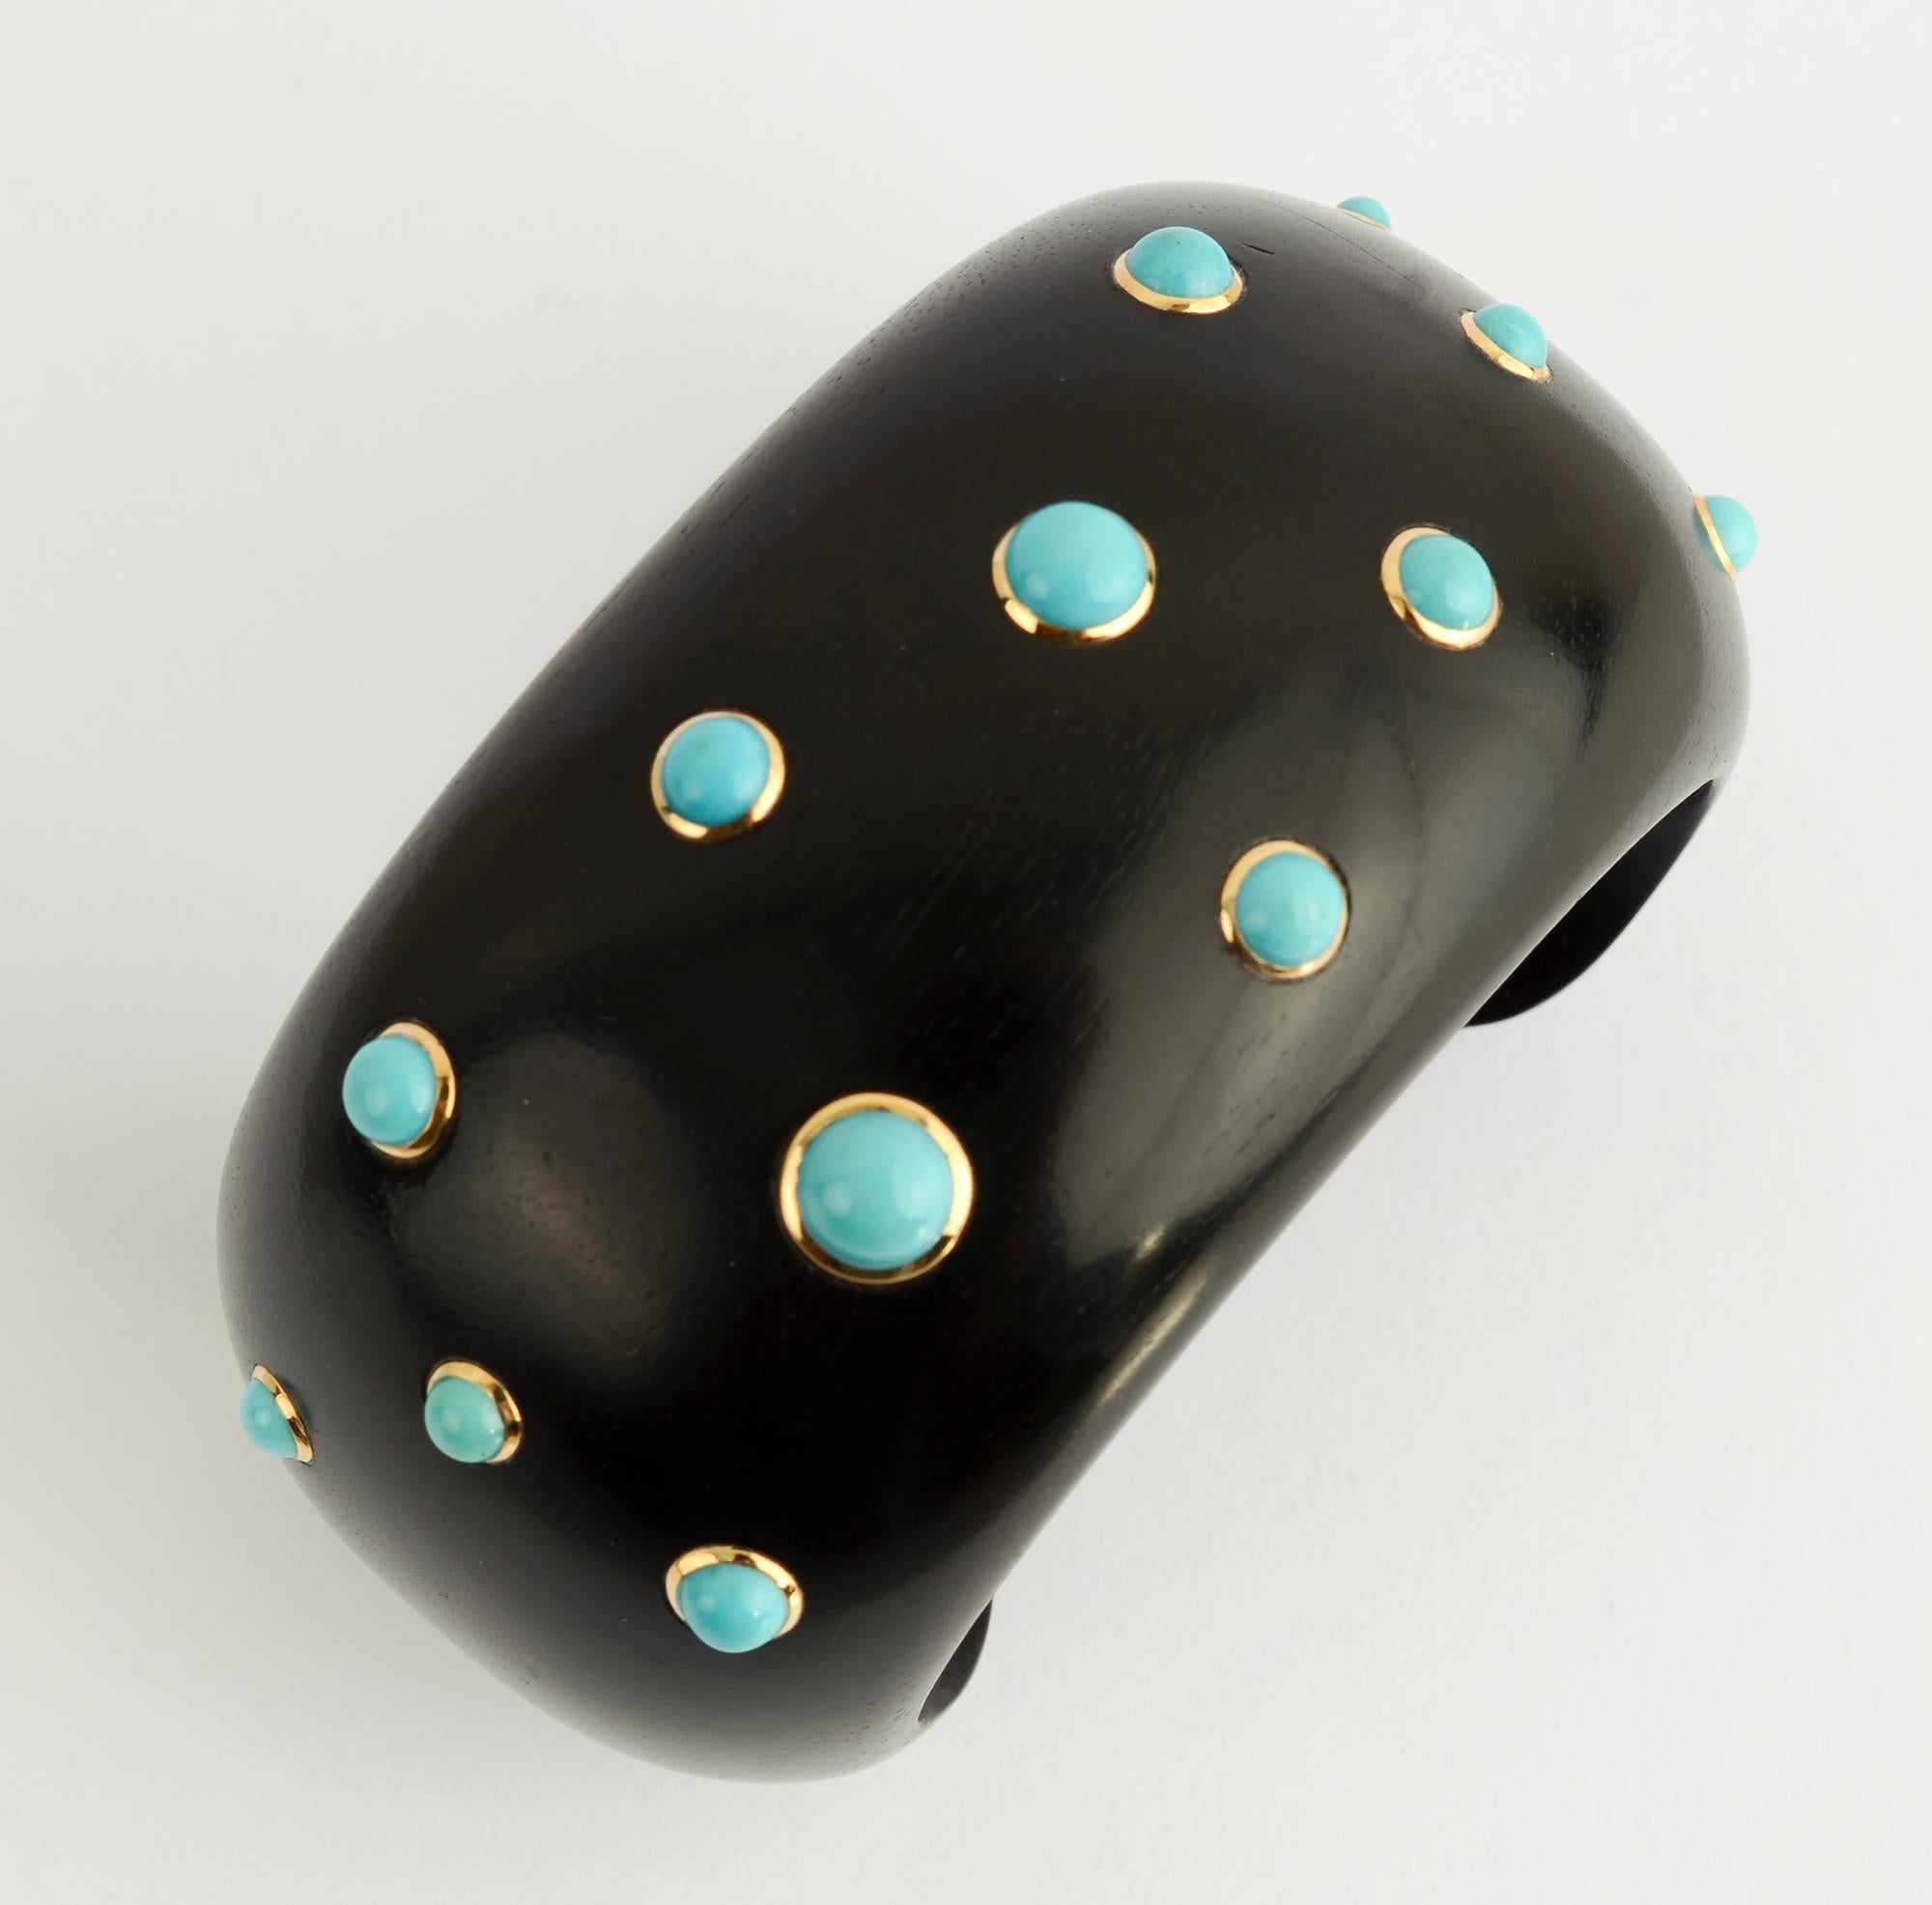 Stunning ebony and turquoise cuff bracelet by Trianon. The turquoise stones are set in 18 karat gold.
The bracelet has an inside diameter of 2 1/4 inches with an opening of 1 1/4 inches.  It is 1 3/4 inches wide. The bracelet  fits a medium wrist.